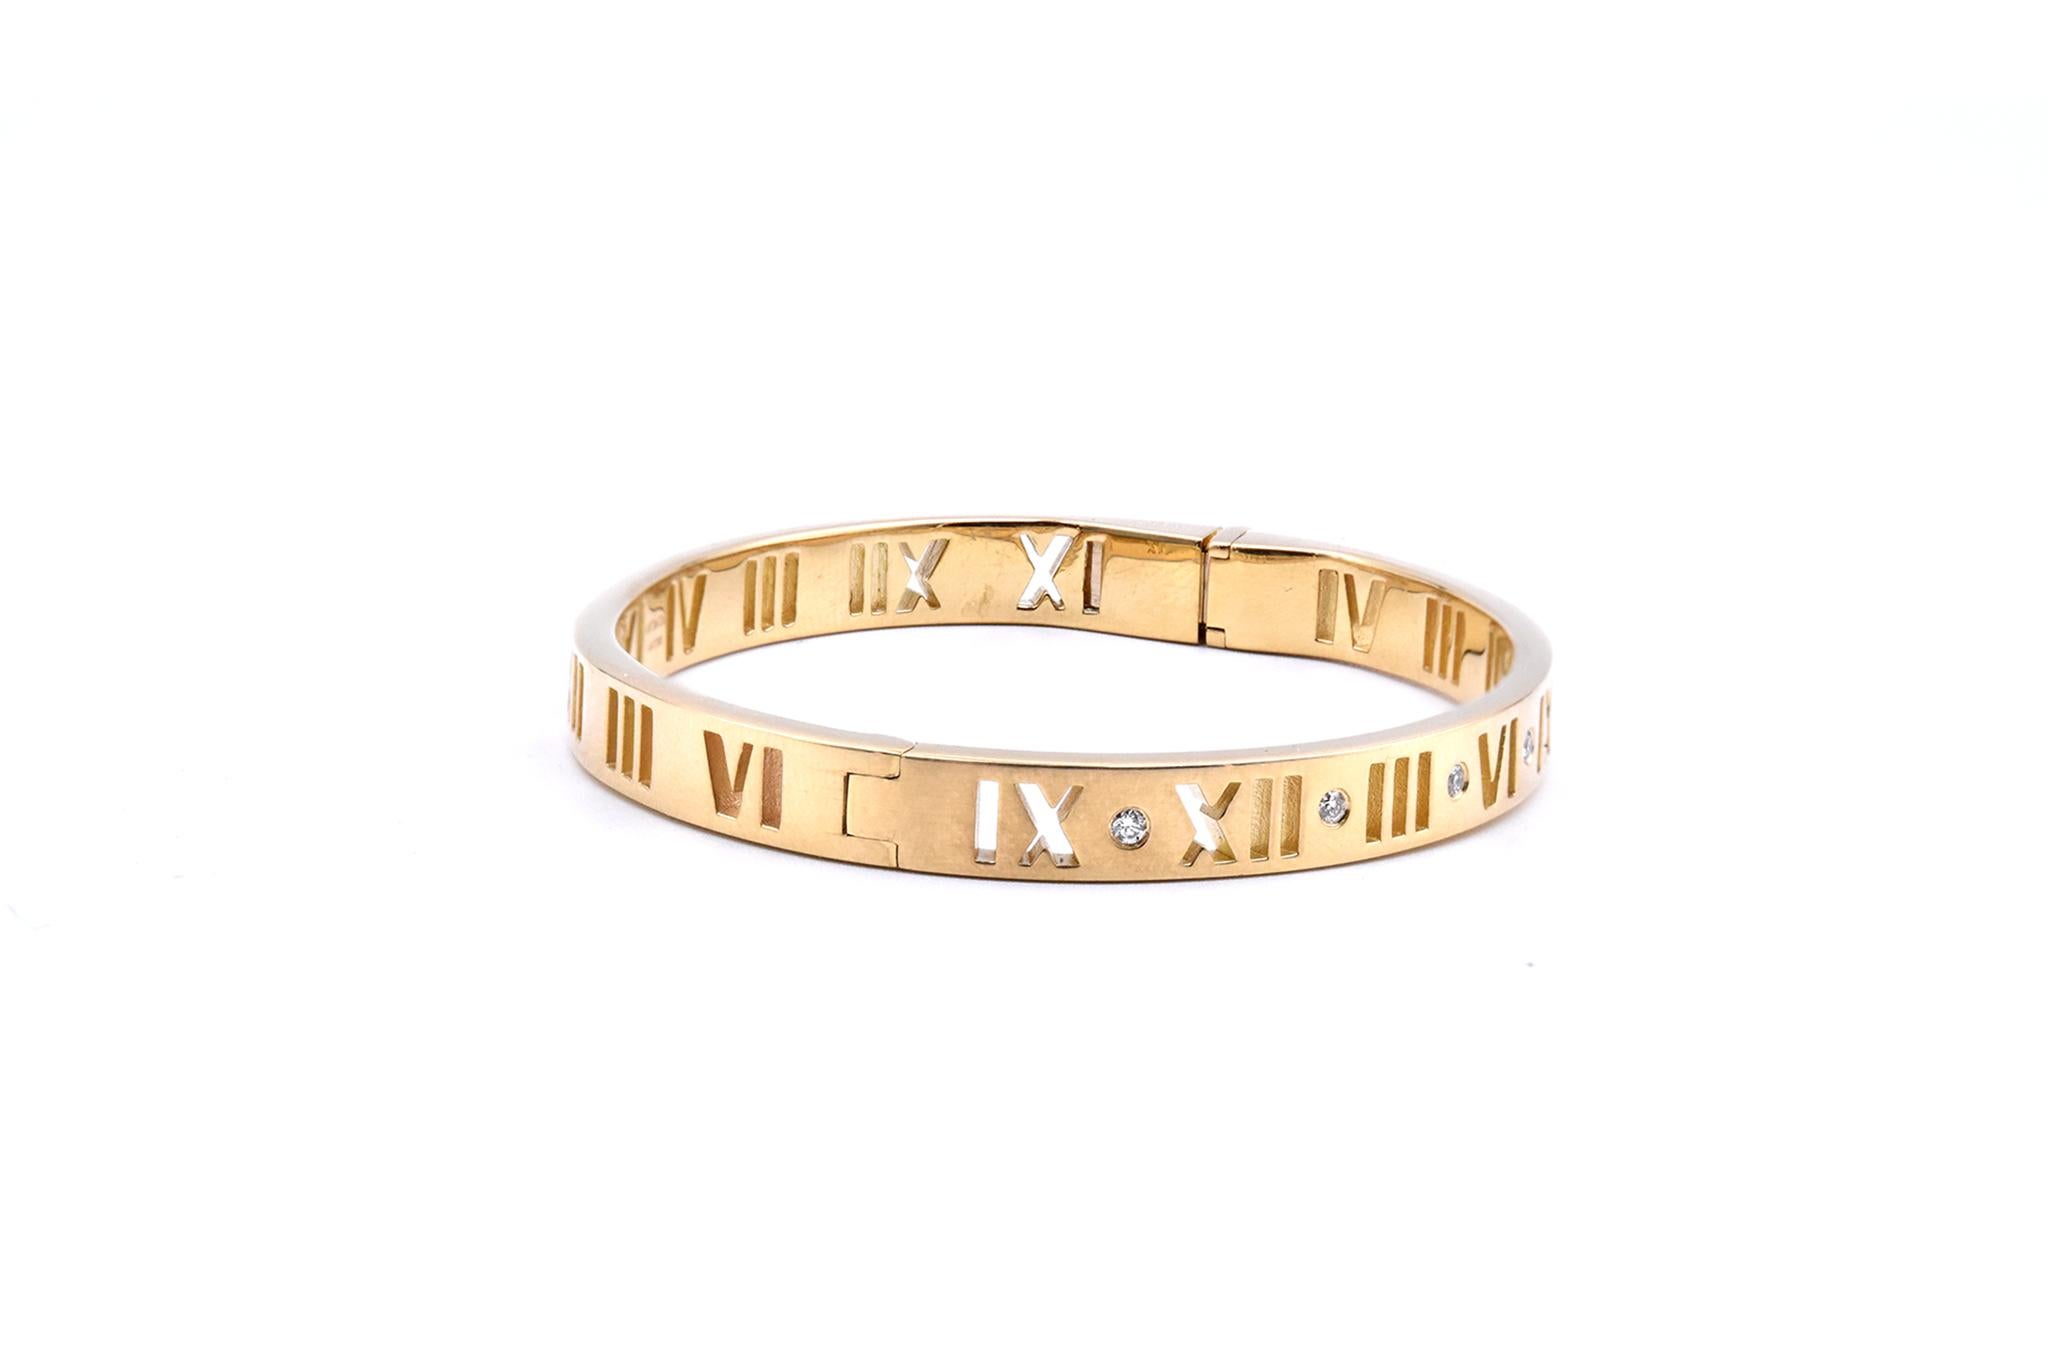 
Designer: Tiffany & Co. 
Material: 18K yellow gold 
Diamonds: 7 round cut = 0.14cttw
Color: G
Clarity: VS
Dimensions: Bracelet measures 6-inches 
Weight: 26.50 grams
